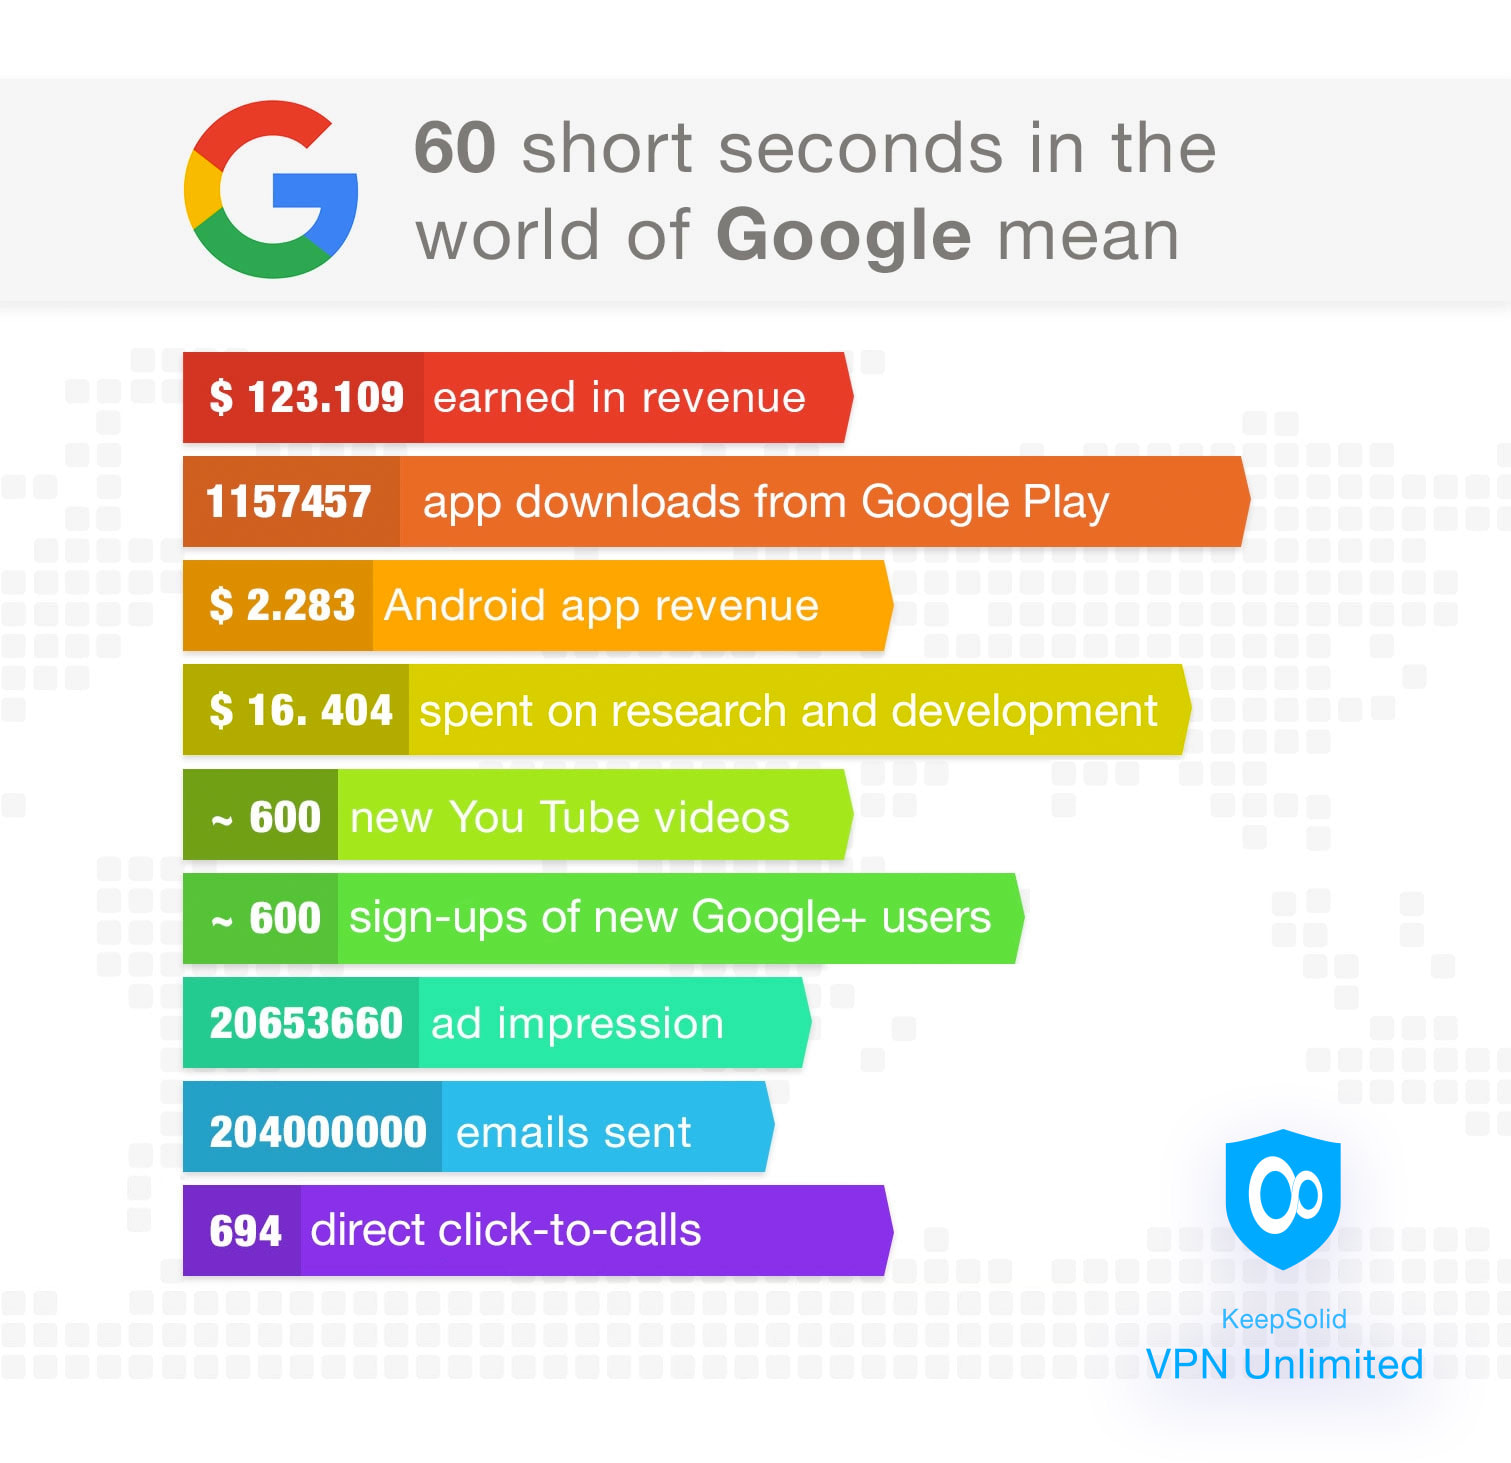 Stats about 60 short seconds in the world of Google mean